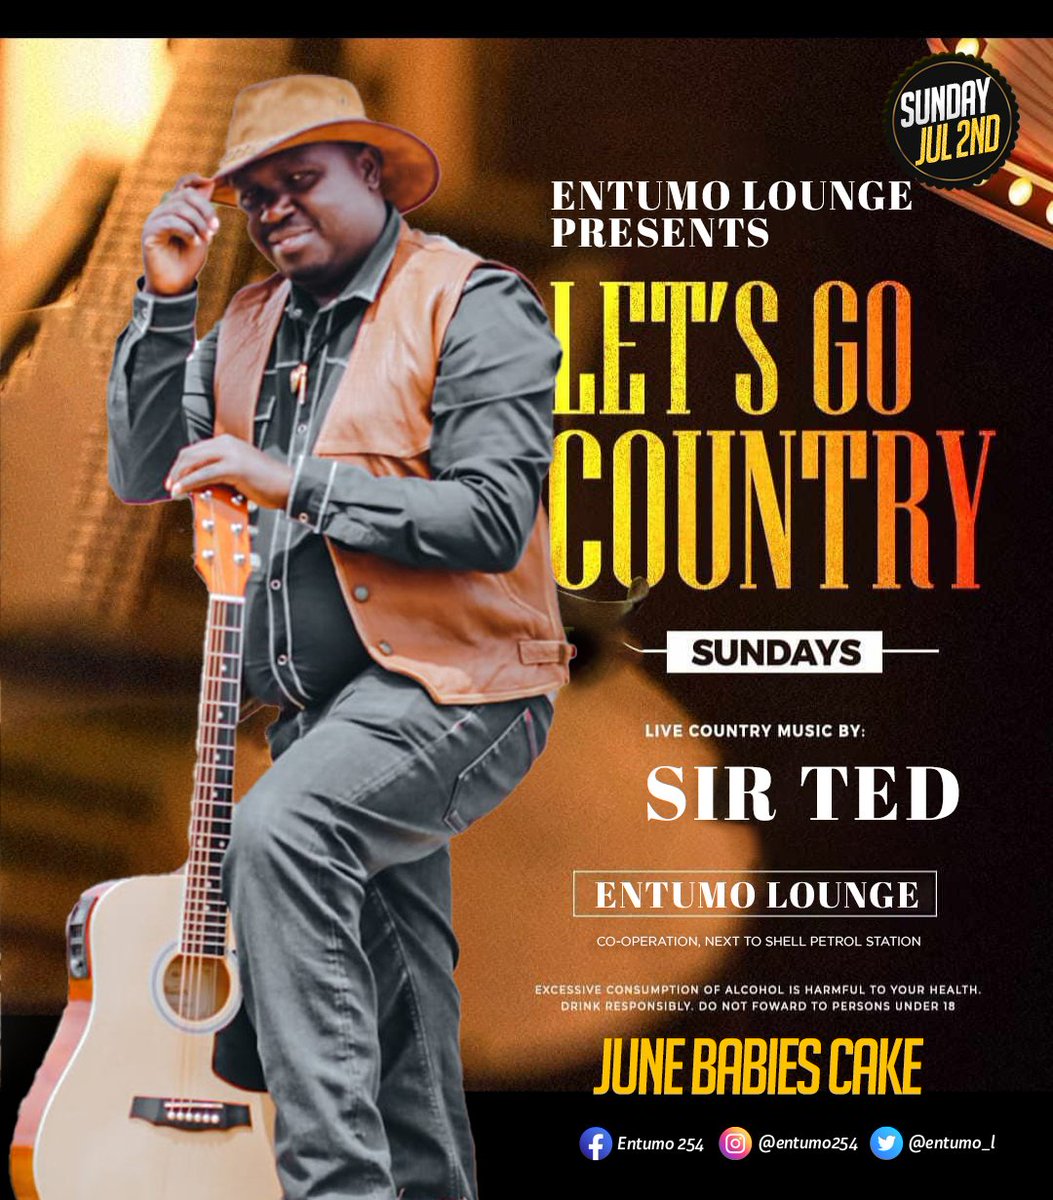 ⚡️Dust your cowboy/girl hats👒&boots👢 ready for an amazing&wild country ride this Sunday....yee-haw🐎 ⚡️There will be cake cutting for all June babies.....boom💥 Entumo Lounge ⏩Another Place.....Another World⏪ #entumo254 #entumolounge #waiyakiwaysfinest #countrysundays❤️